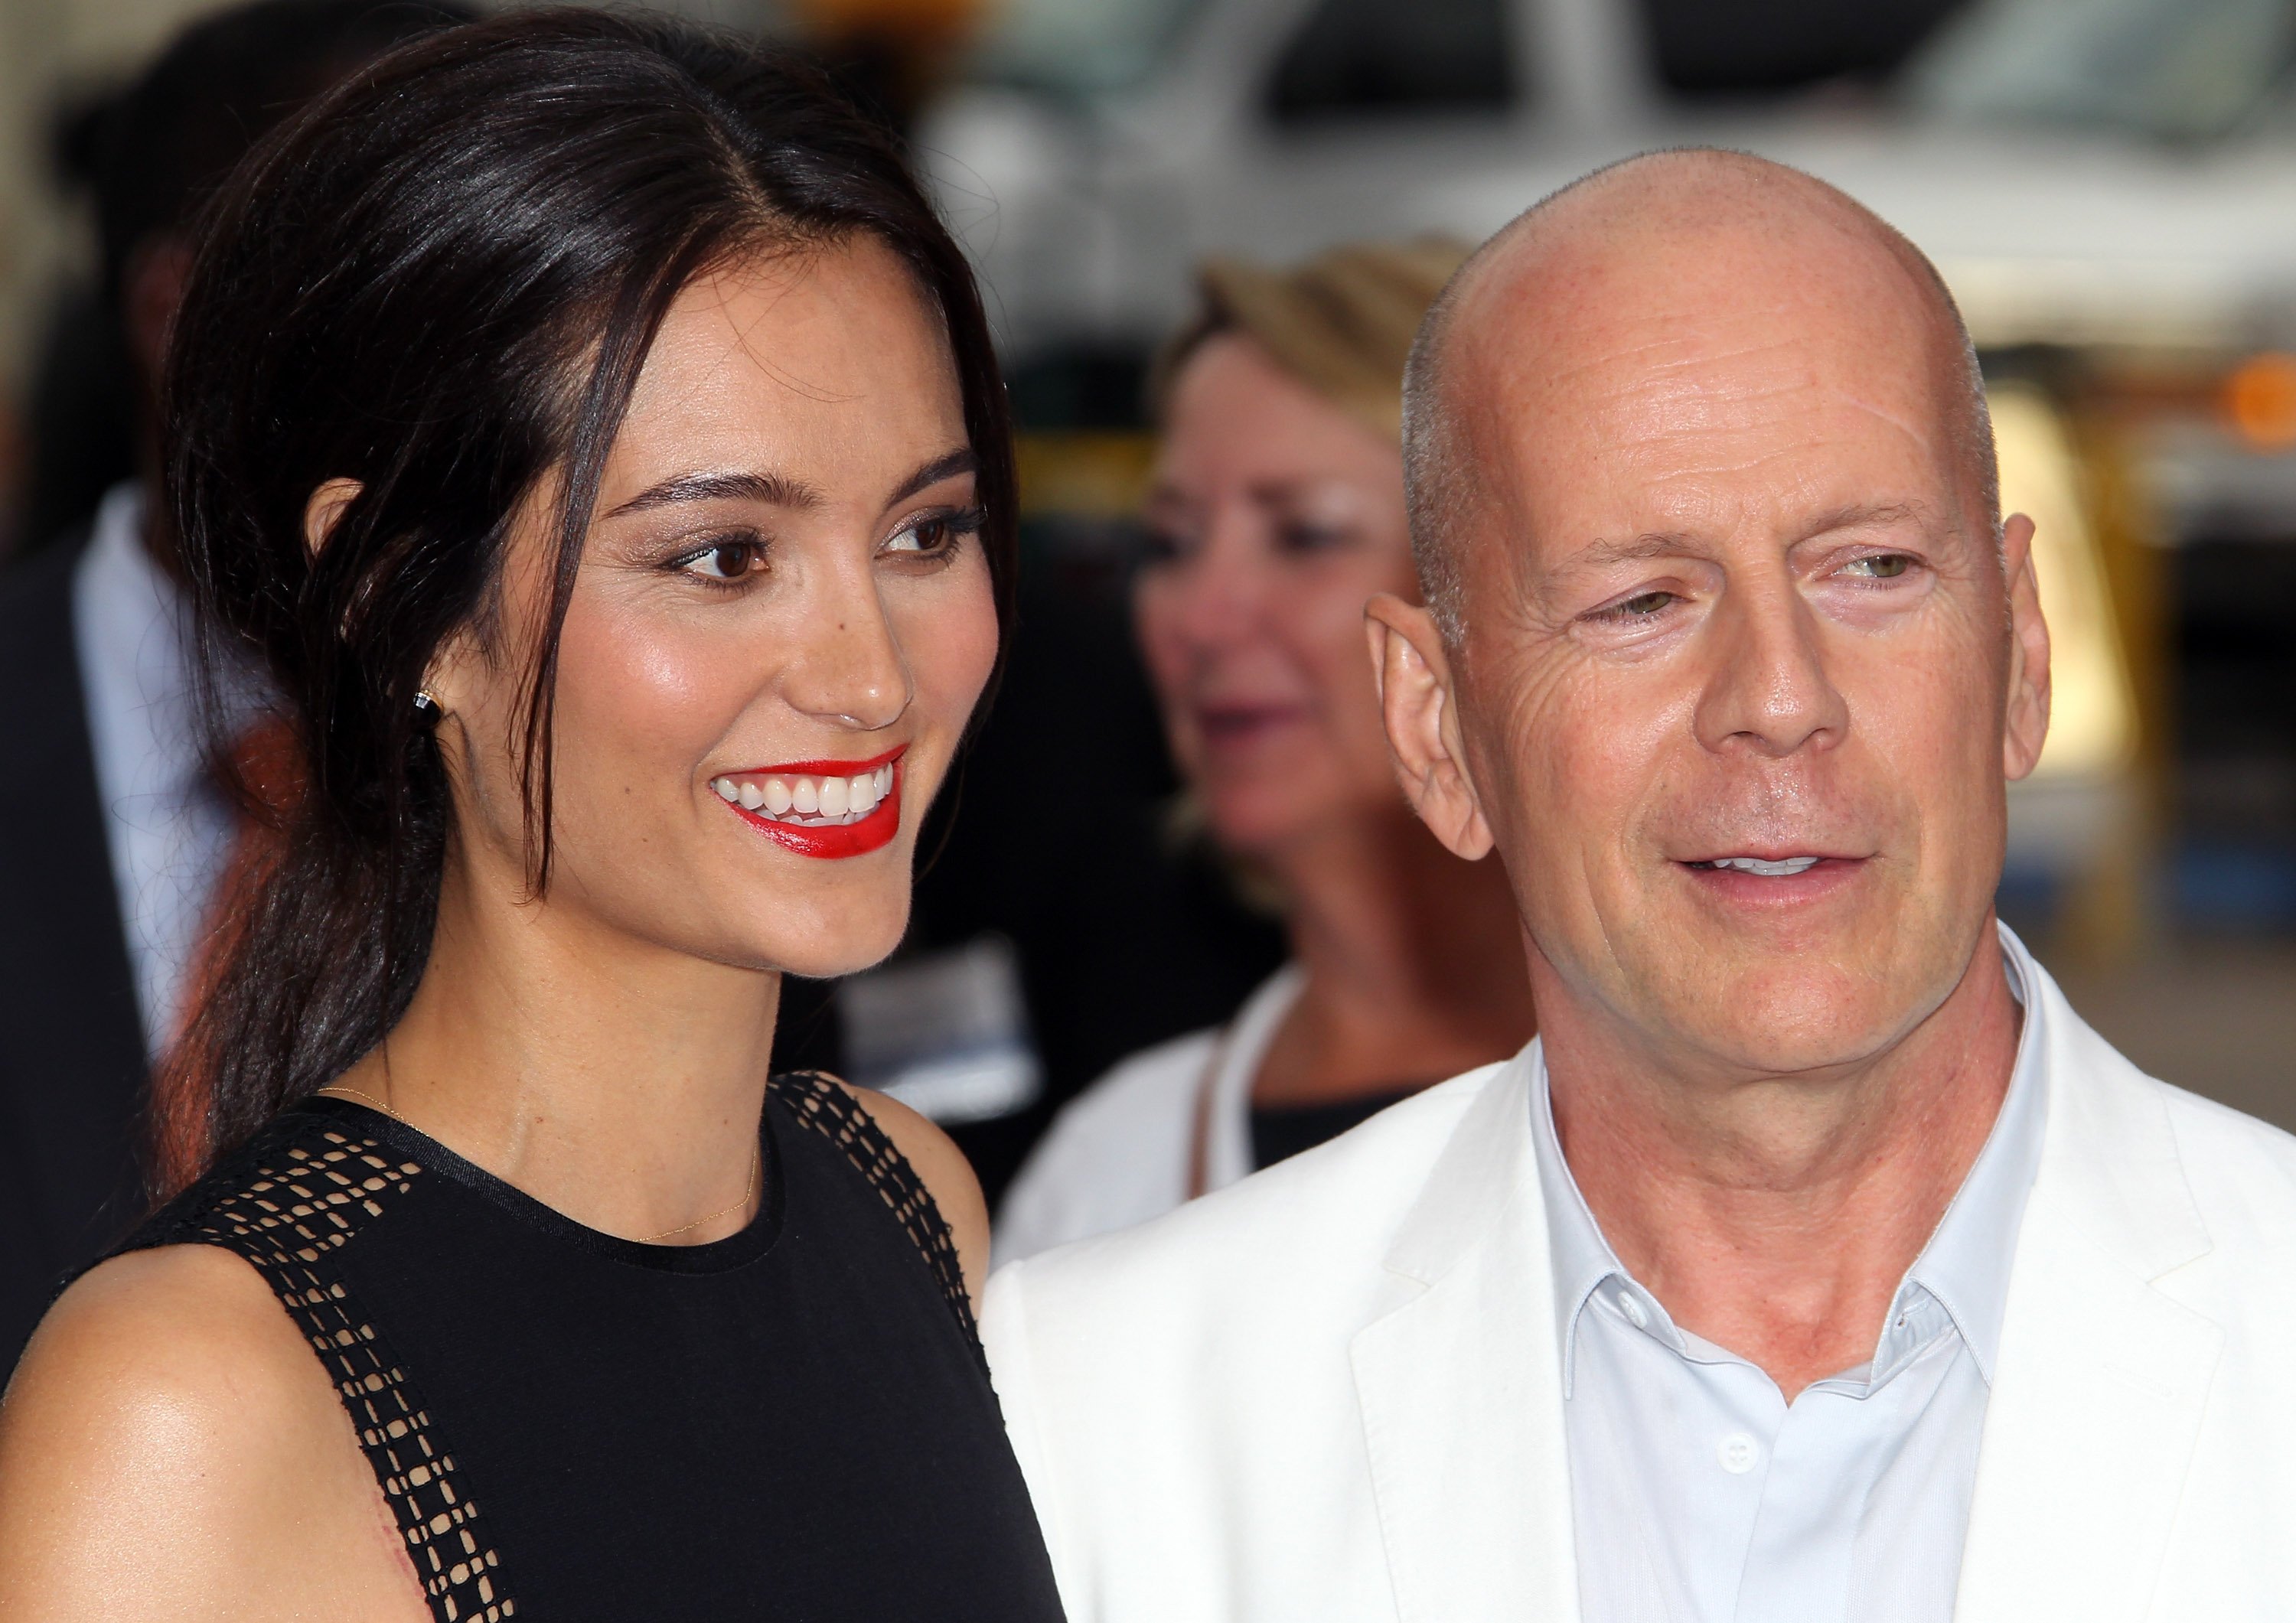  Emma Heming Willis (L) and husband actor Bruce Willis attend the premiere of Summit Entertainment's "RED 2" at Westwood Village on July 11, 2013, in Los Angeles, California. | Source: Getty Images.